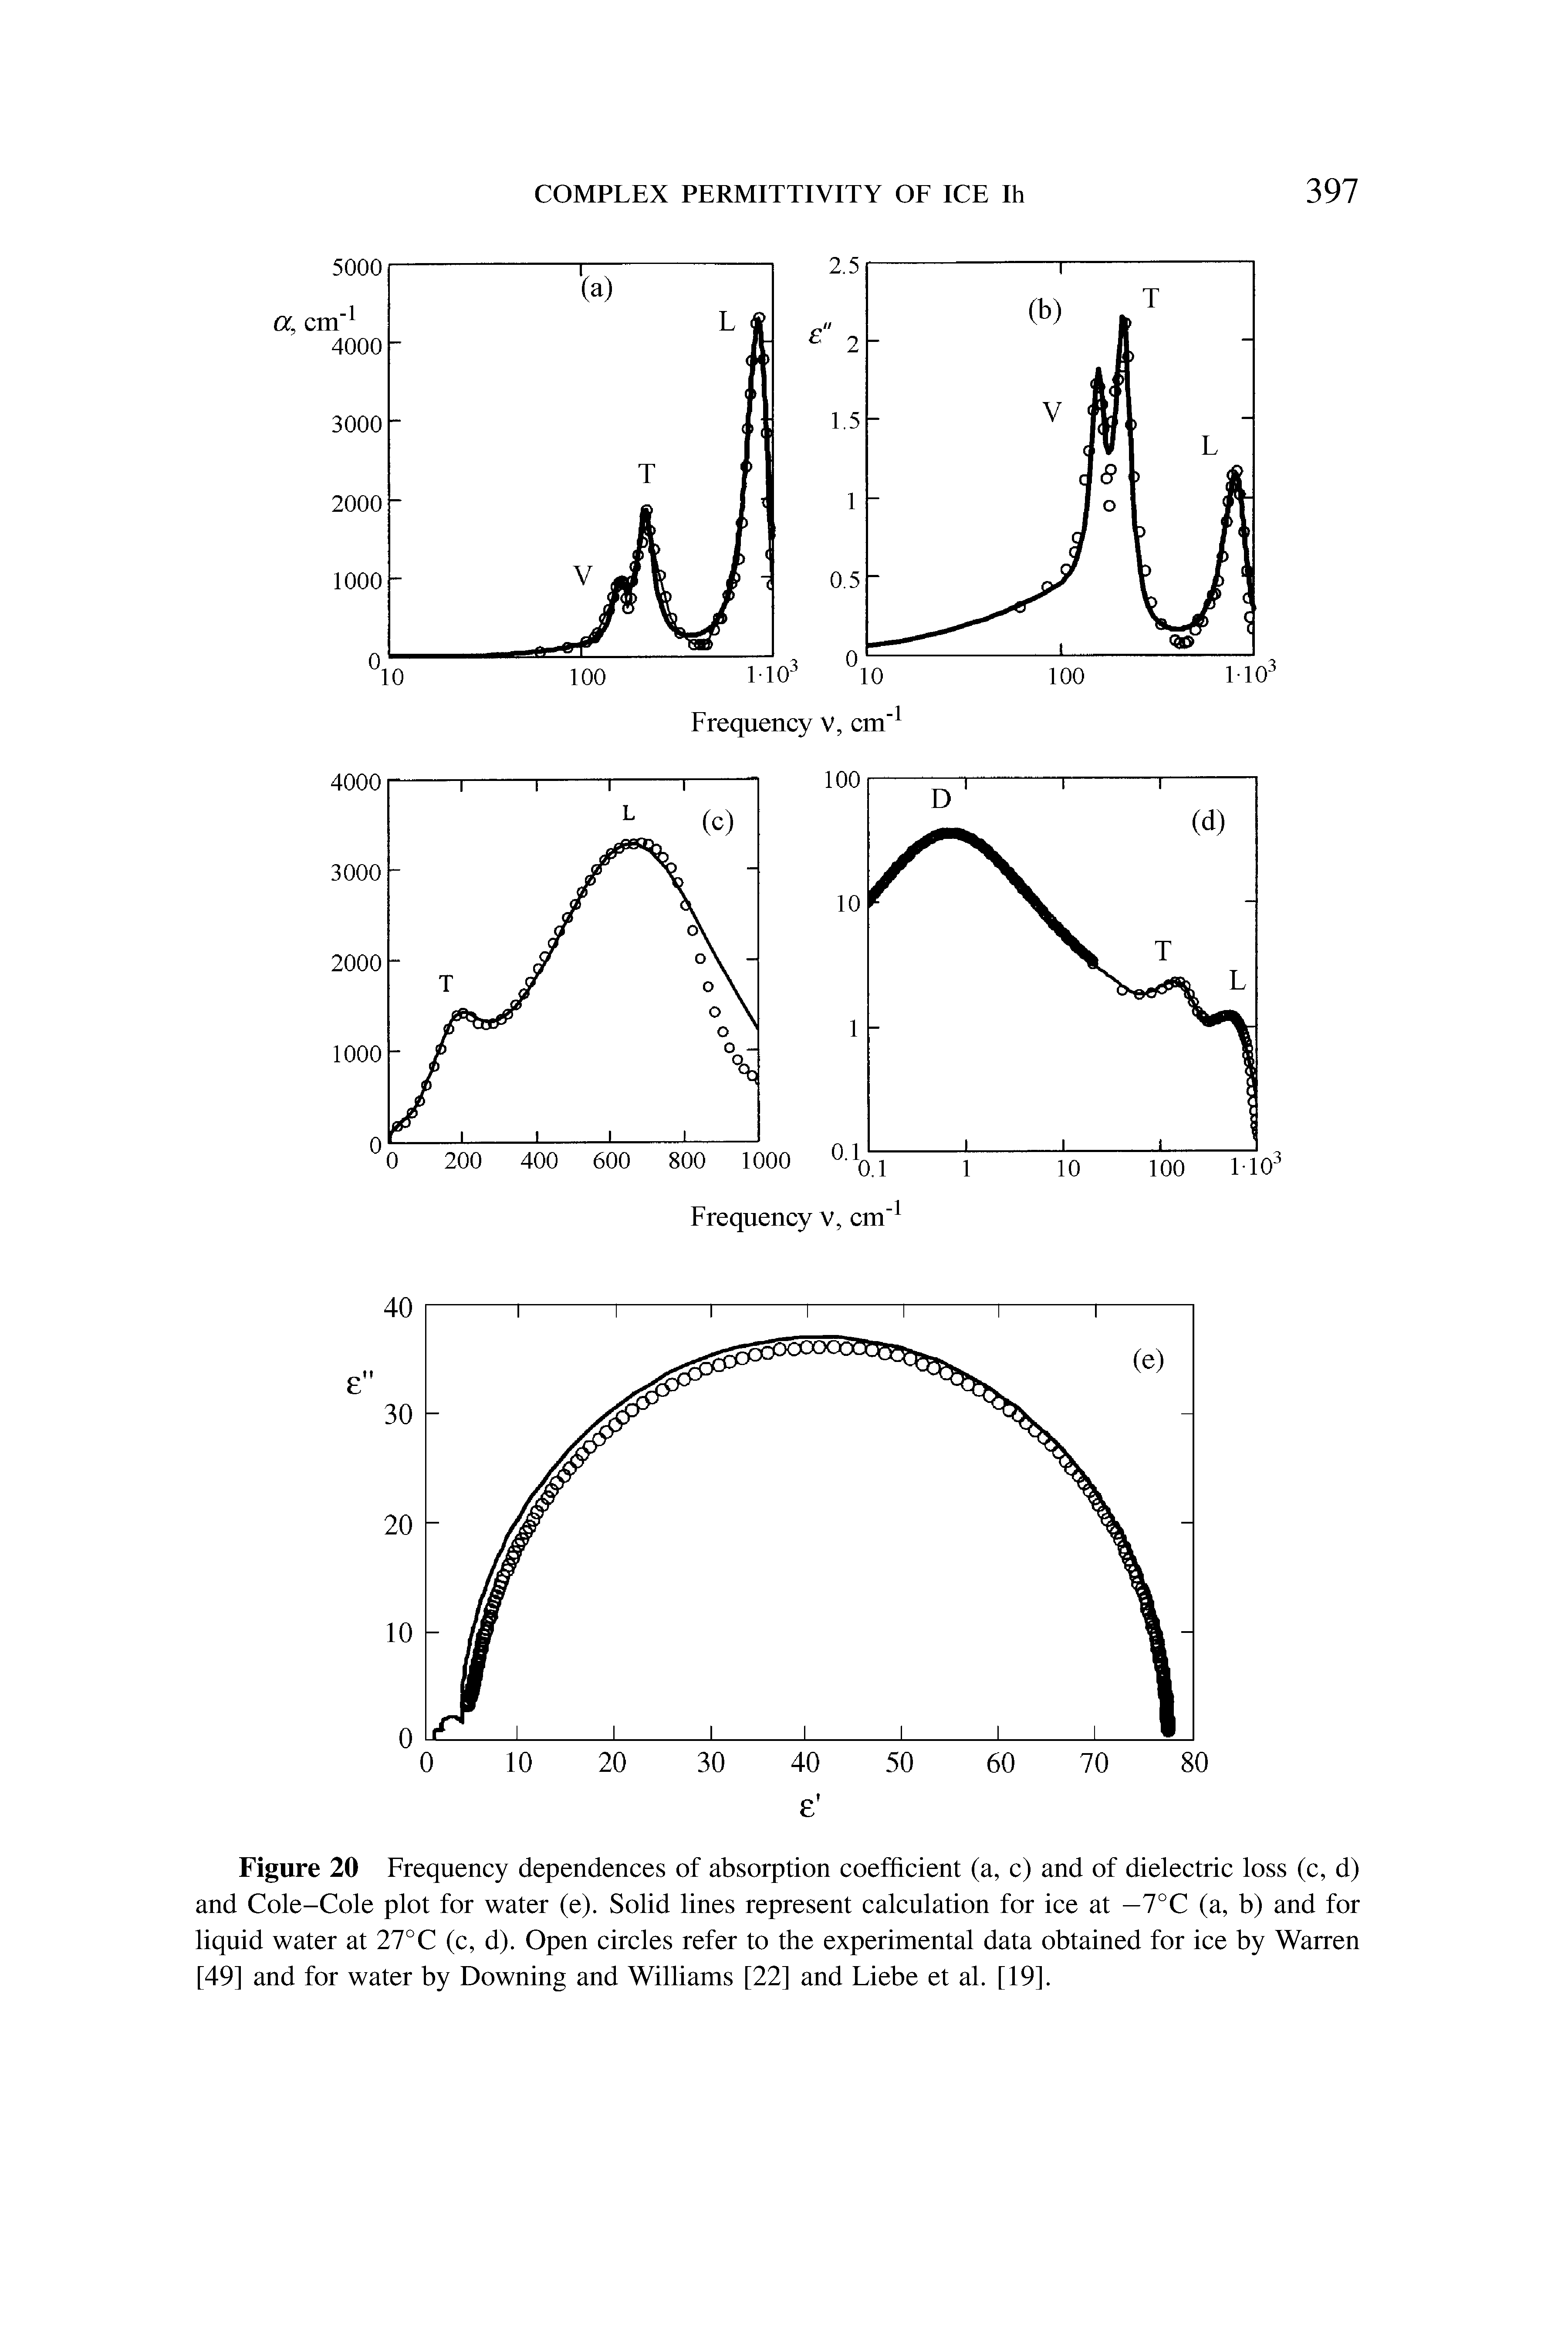 Figure 20 Frequency dependences of absorption coefficient (a, c) and of dielectric loss (c, d) and Cole-Cole plot for water (e). Solid lines represent calculation for ice at —7°C (a, b) and for liquid water at 27°C (c, d). Open circles refer to the experimental data obtained for ice by Warren [49] and for water by Downing and Williams [22] and Liebe et al. [19].